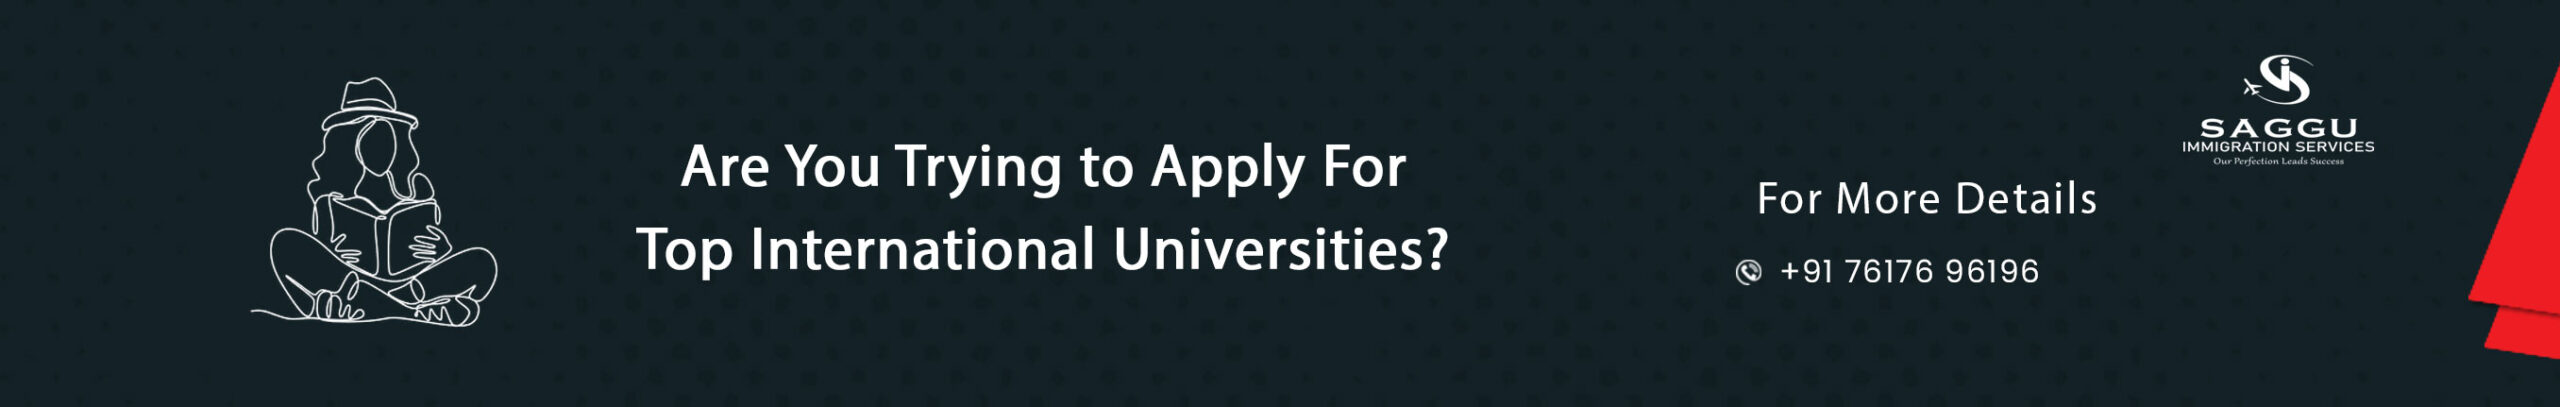 Are You Trying to Apply For Top International Universities?